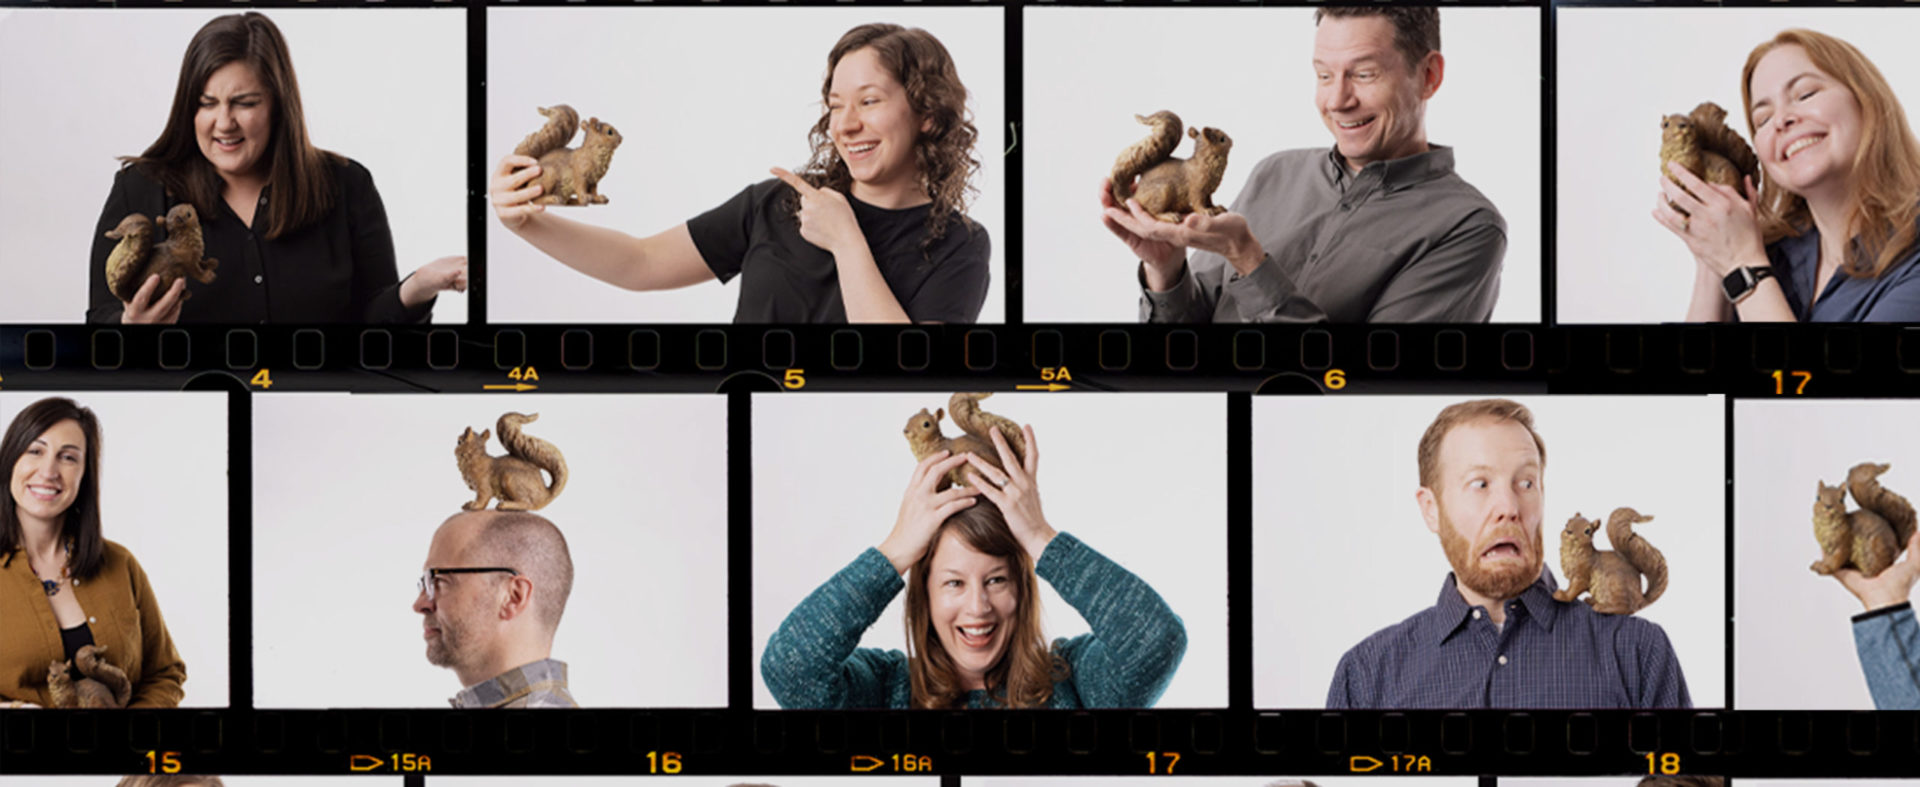 collage of people with squirrel figurines